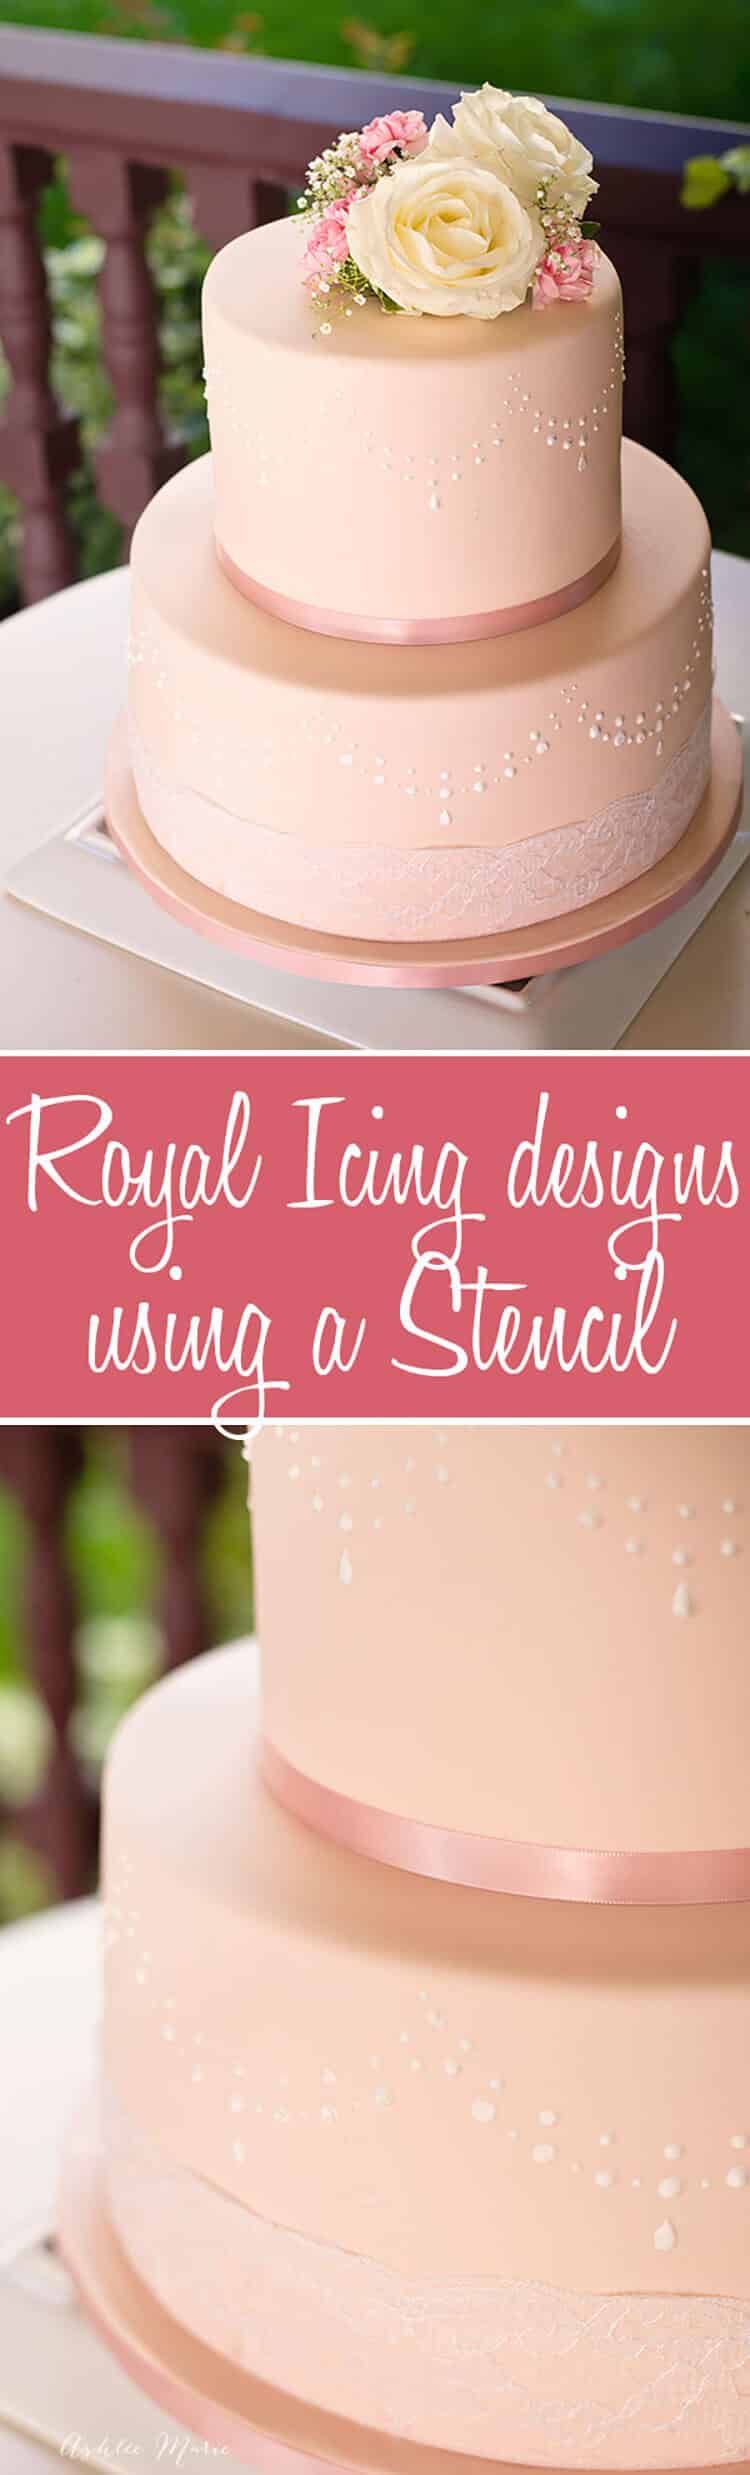 decorating a fondant cake with smooth and beautiful royal icing is lovely, make it even easy to get even, repetitive designs using stencils - a full video tutorial with tips